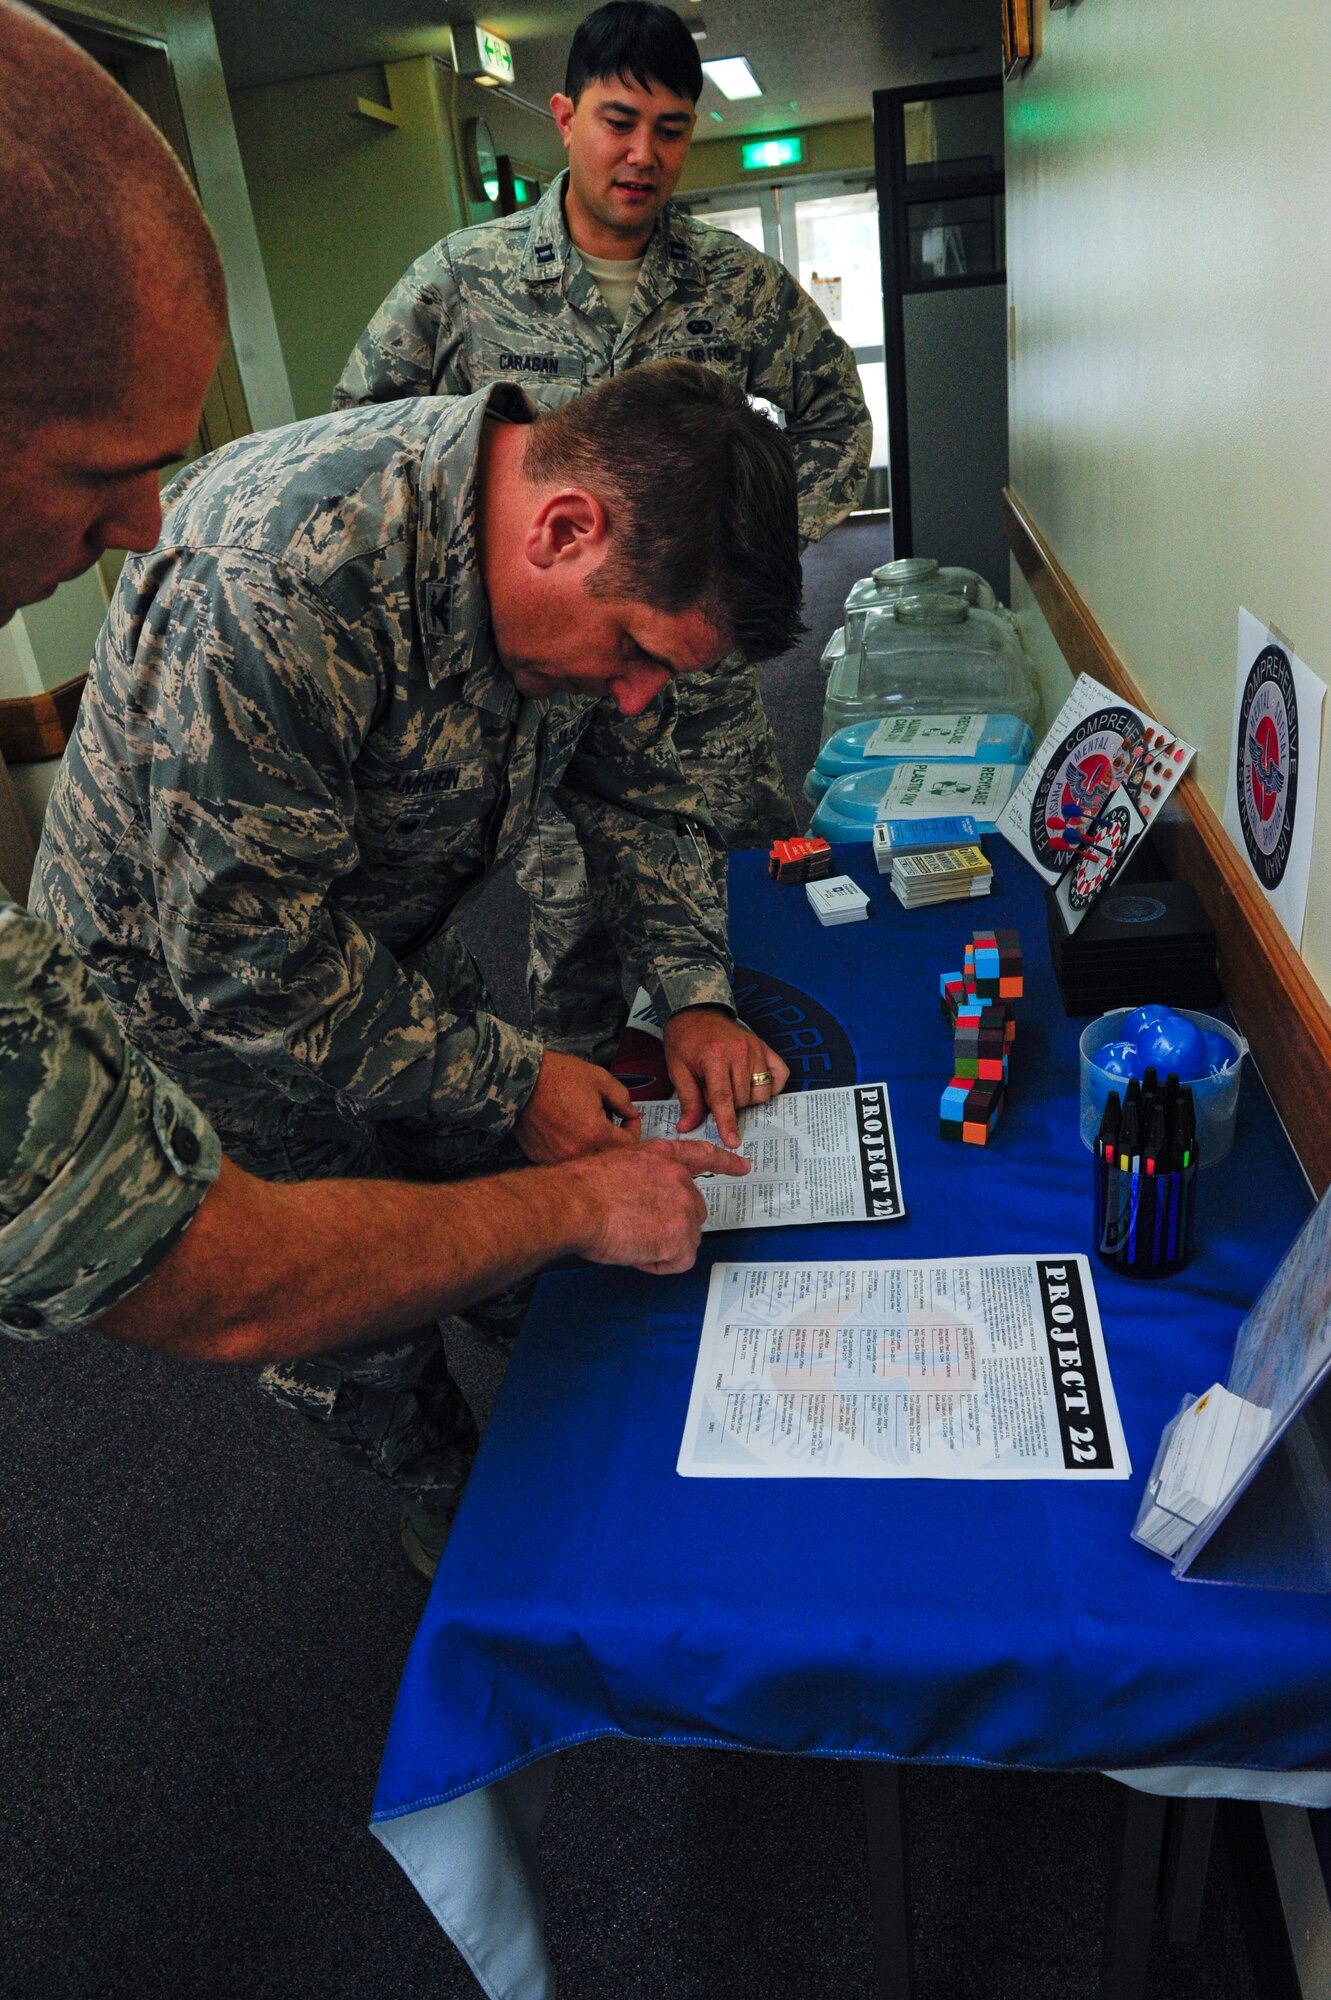 Capt. Levi Cole, 18th Medical Operations Squadron psychologist, shows Col. Christopher Amrhein, 18th Wing vice commander, a Project 22 worksheet at the equal opportunity office Sept. 14, 2015 at Kadena Air Base, Japan. The goal of Project 22 is to show Airmen all of the different resources available to them. (U.S. Air Force photo by Airman 1st Class Corey M. Pettis)